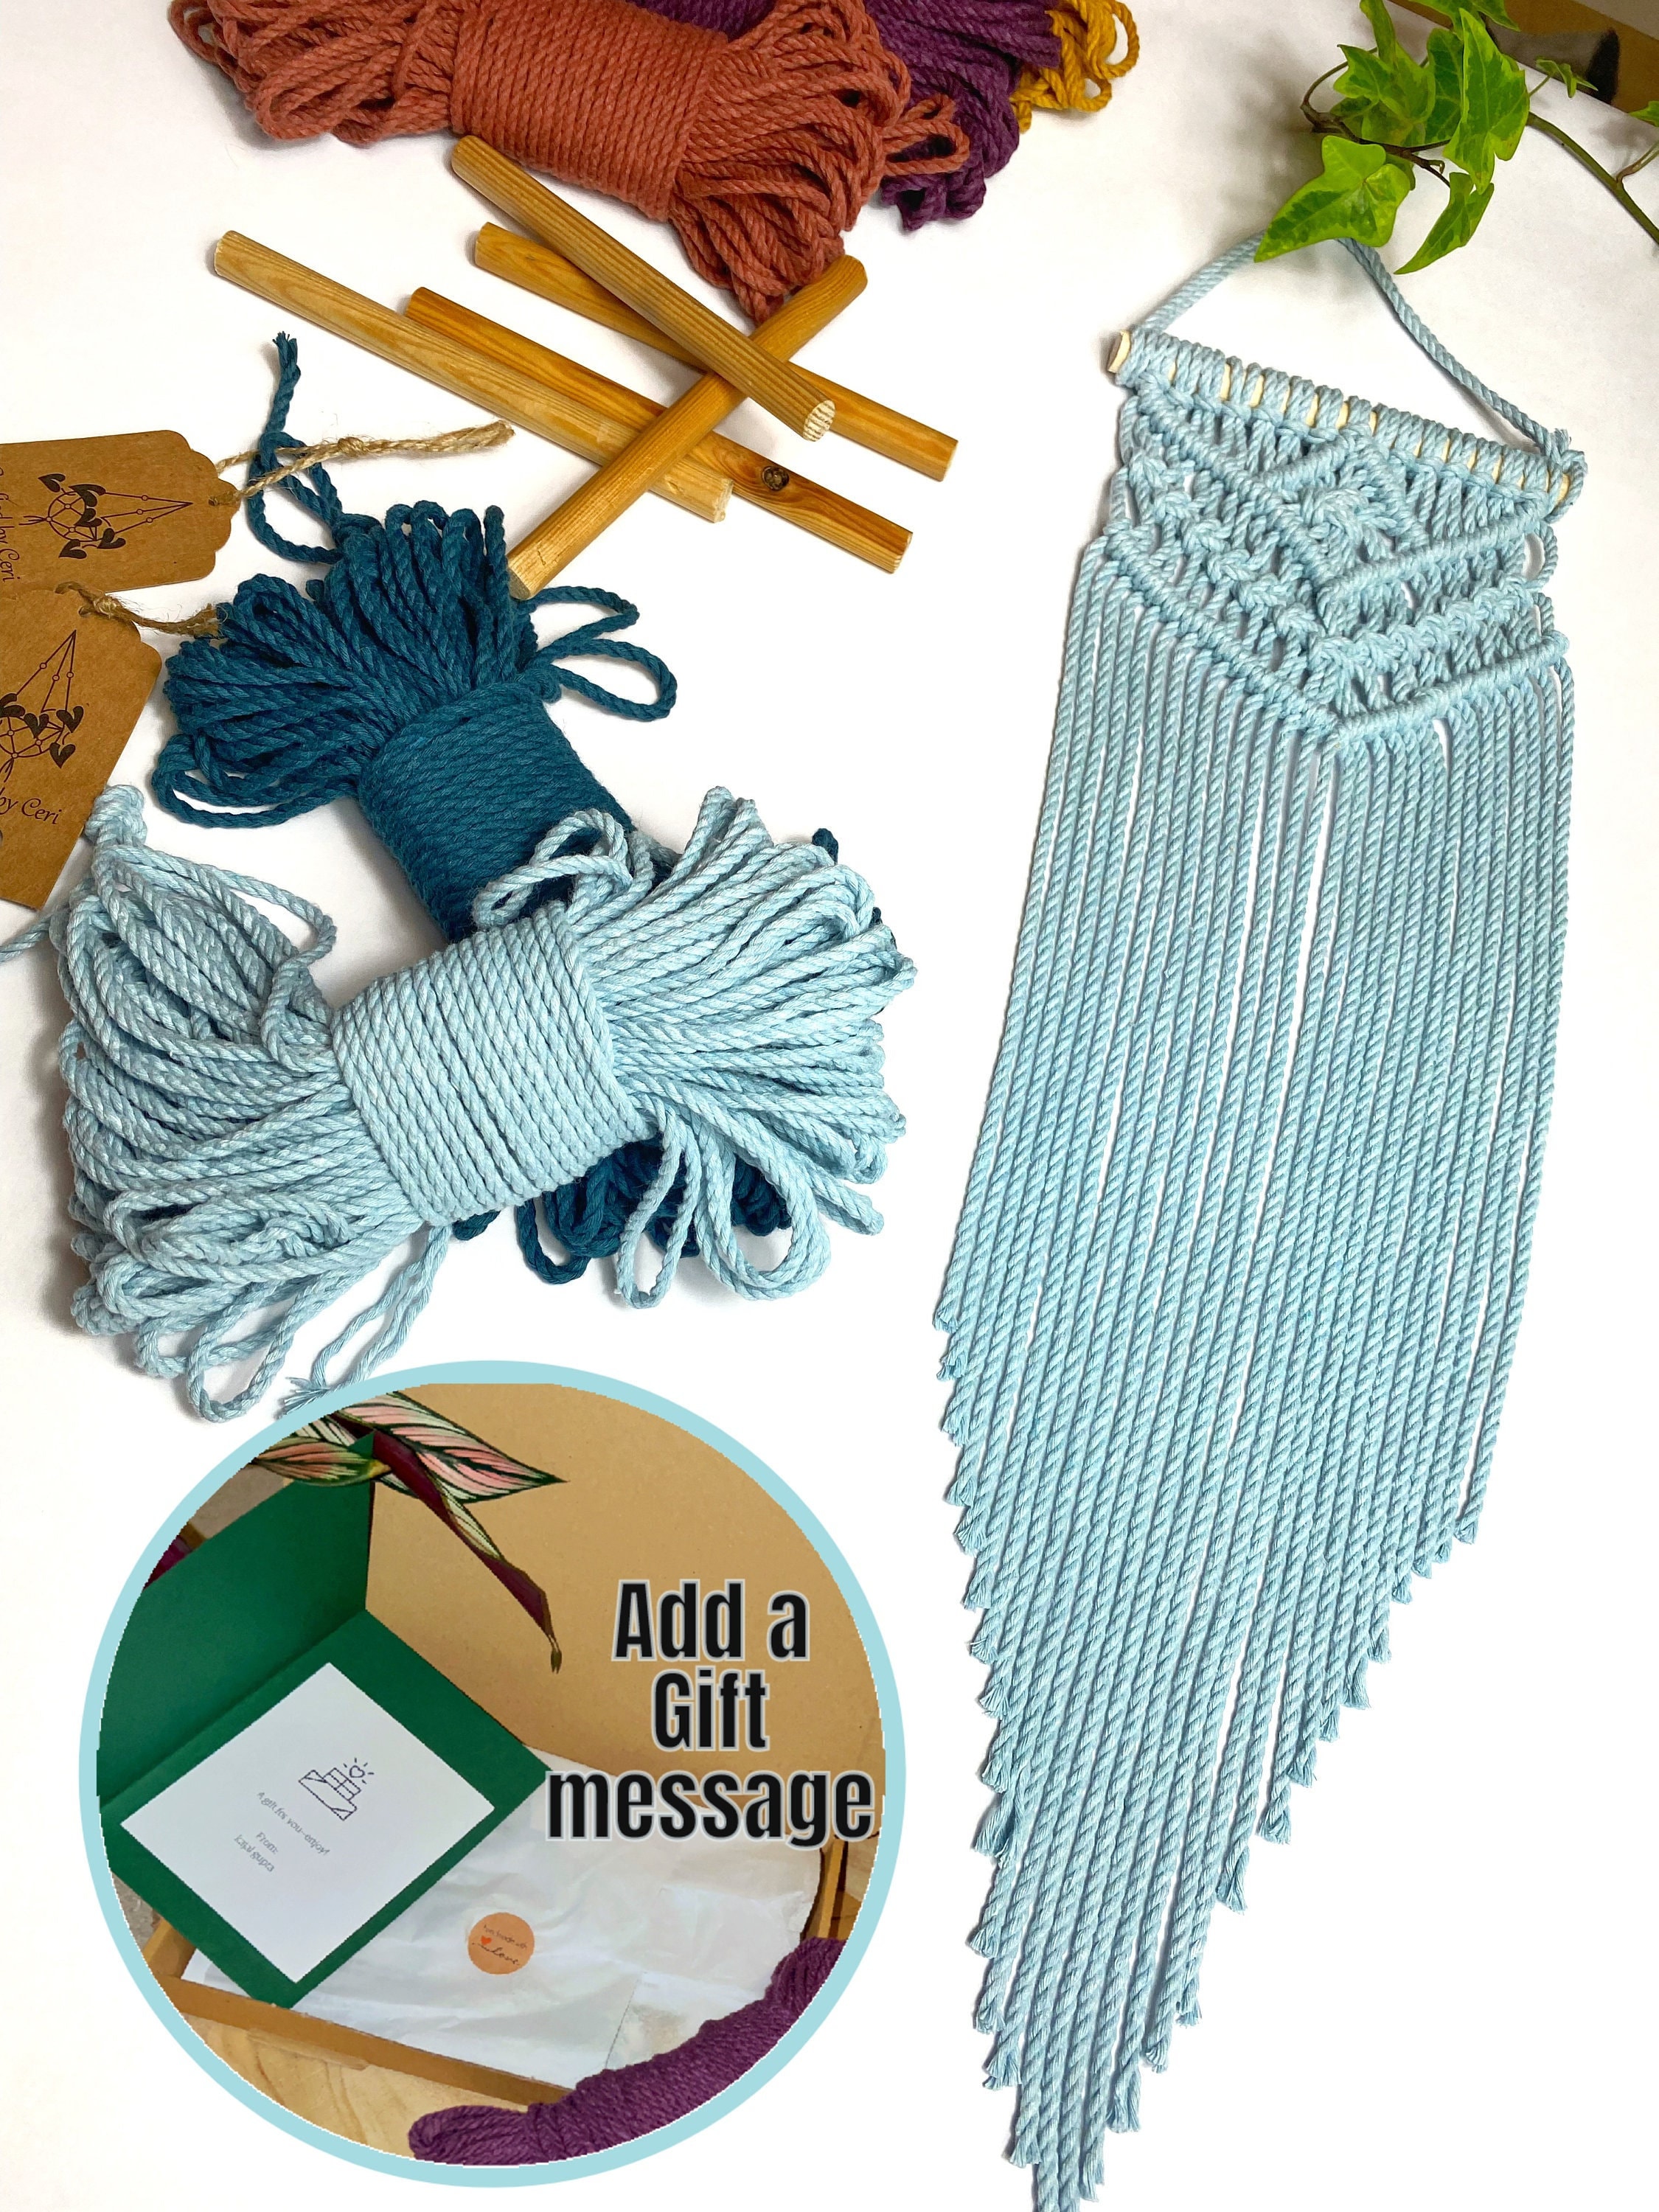 PDF ONLY Macrame for Beginners Vol. II Easy Patterns & Instructions  Downloadable Book 